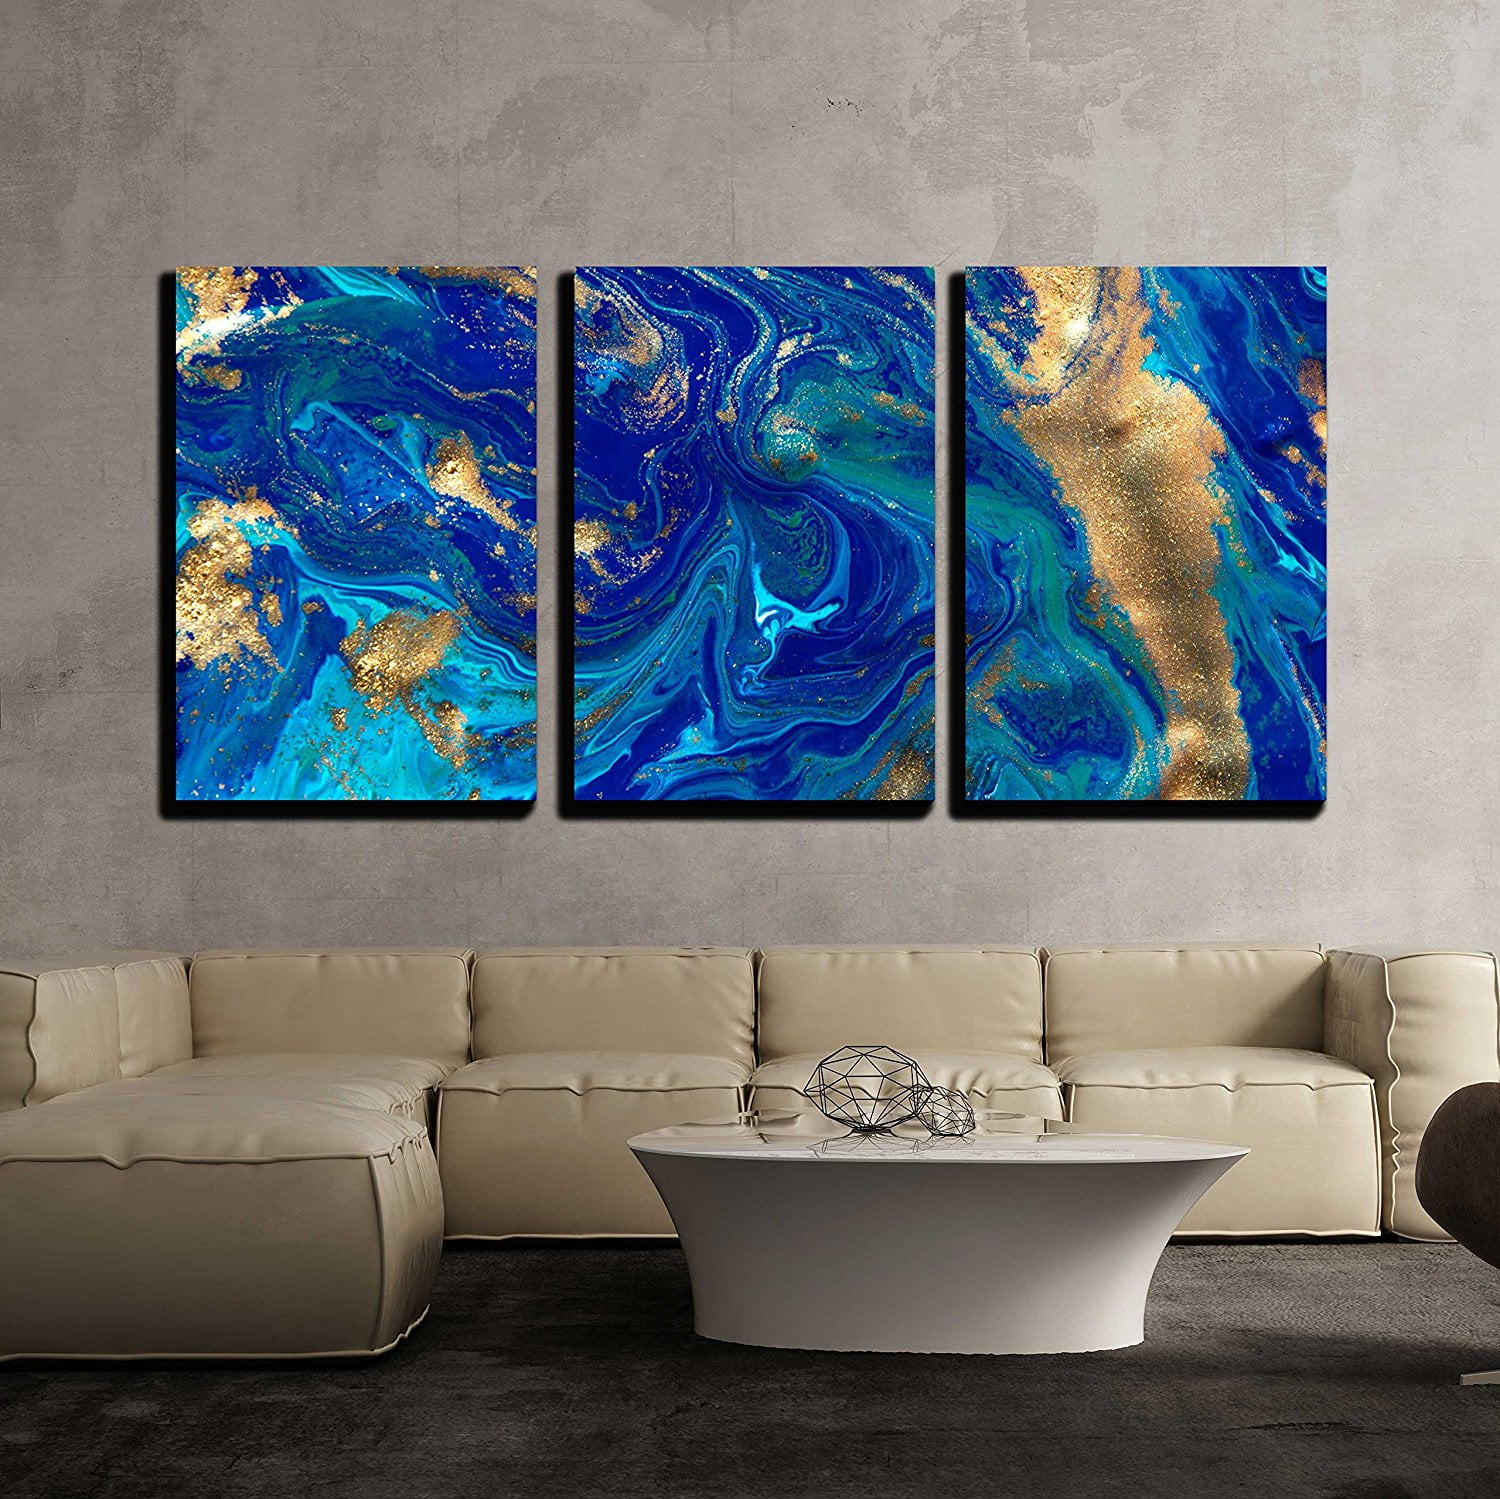 Abstract Stretched Canvas Print Framed Wall Art Hanging Home Office Shop Decor 